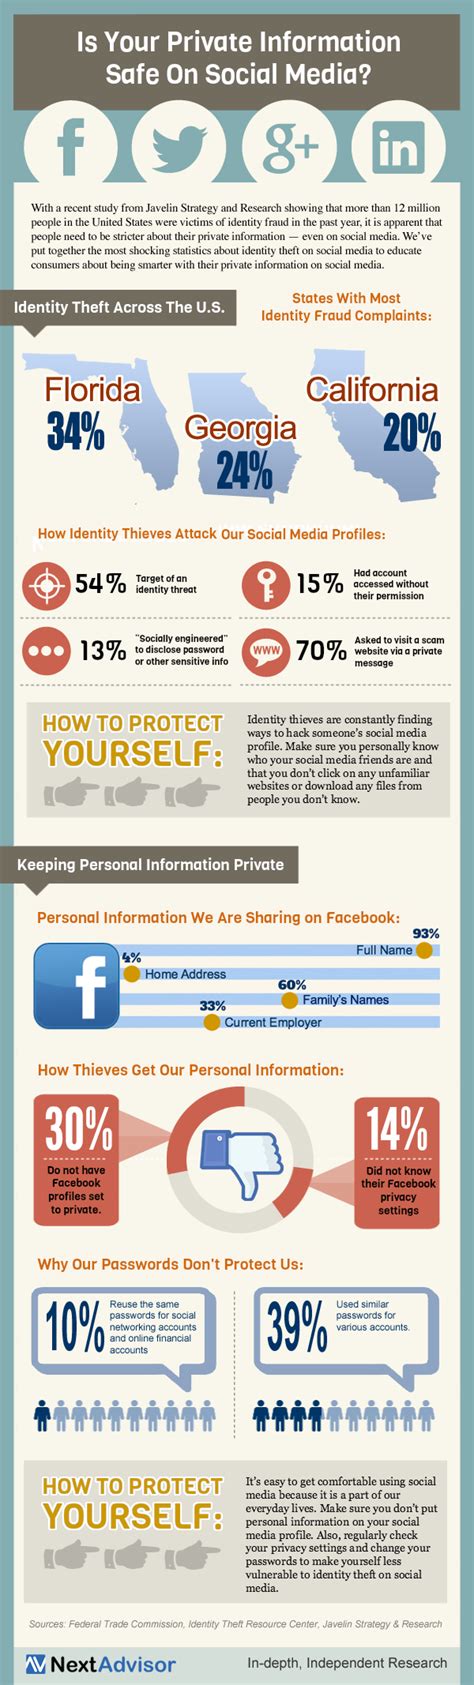 are you sure about your private information safe on social